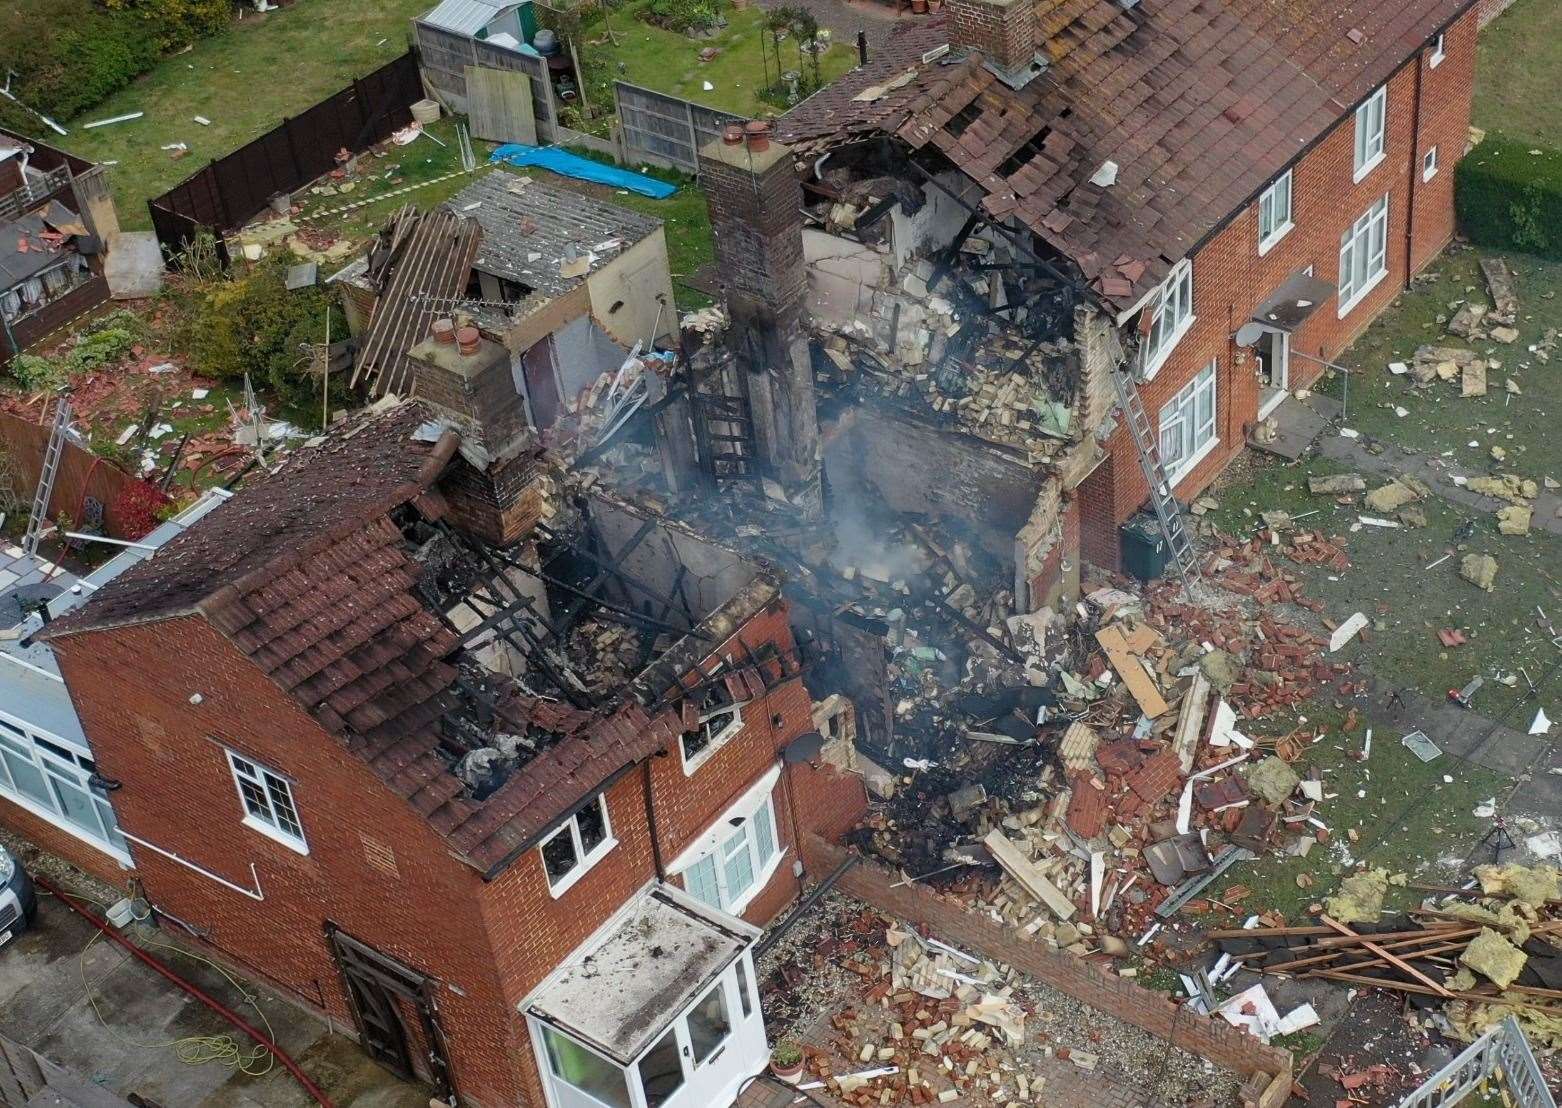 The scene of devastation following the explosion in May